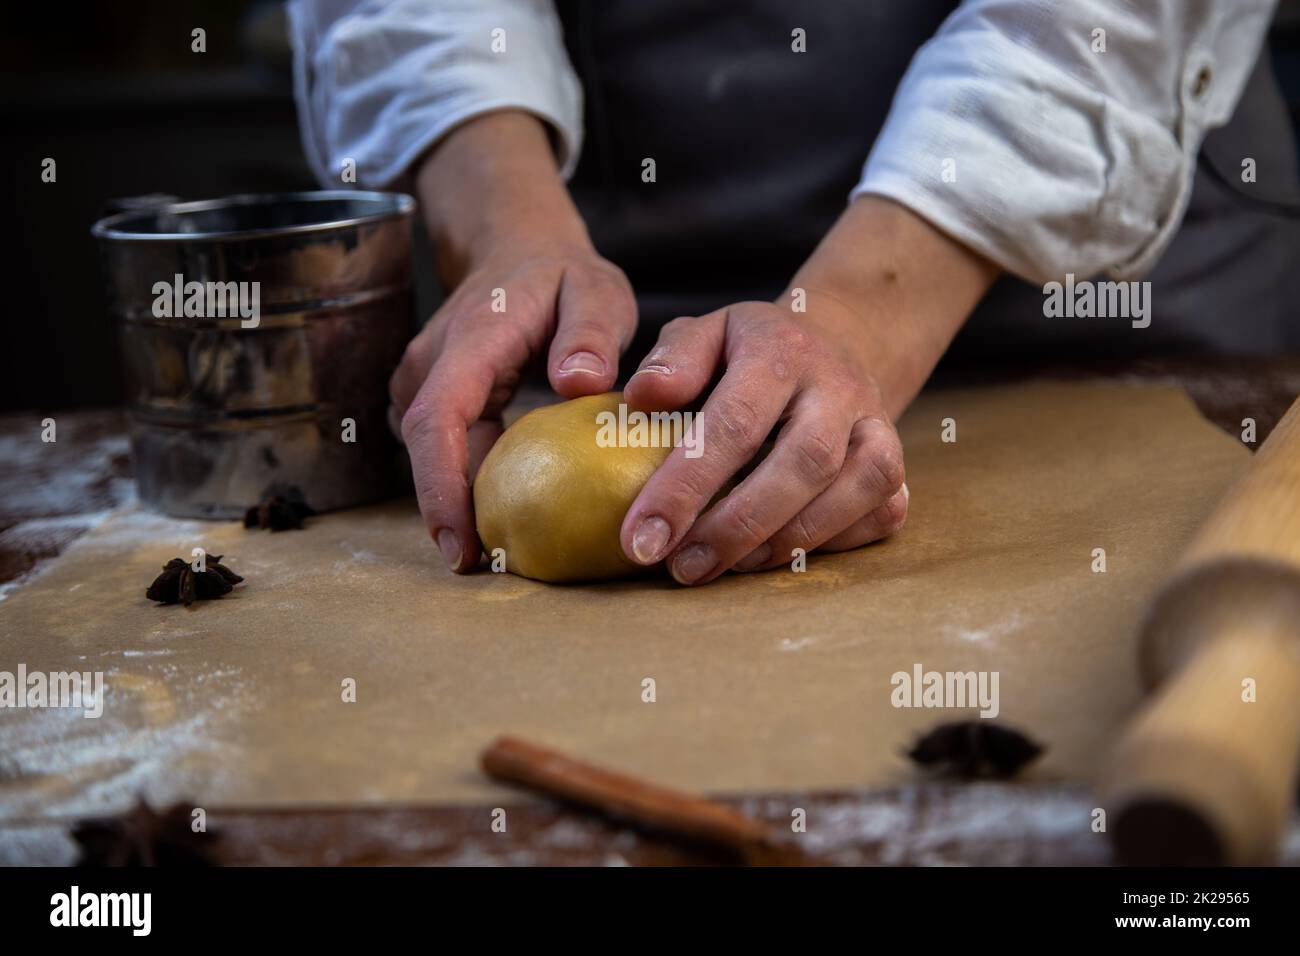 There is a dough on the parchment, slightly sprinkled with flour, which the cook holds in his hands, a rolling pin, cookie cutters, cinnamon and a metal flour jar are visible around. Stock Photo